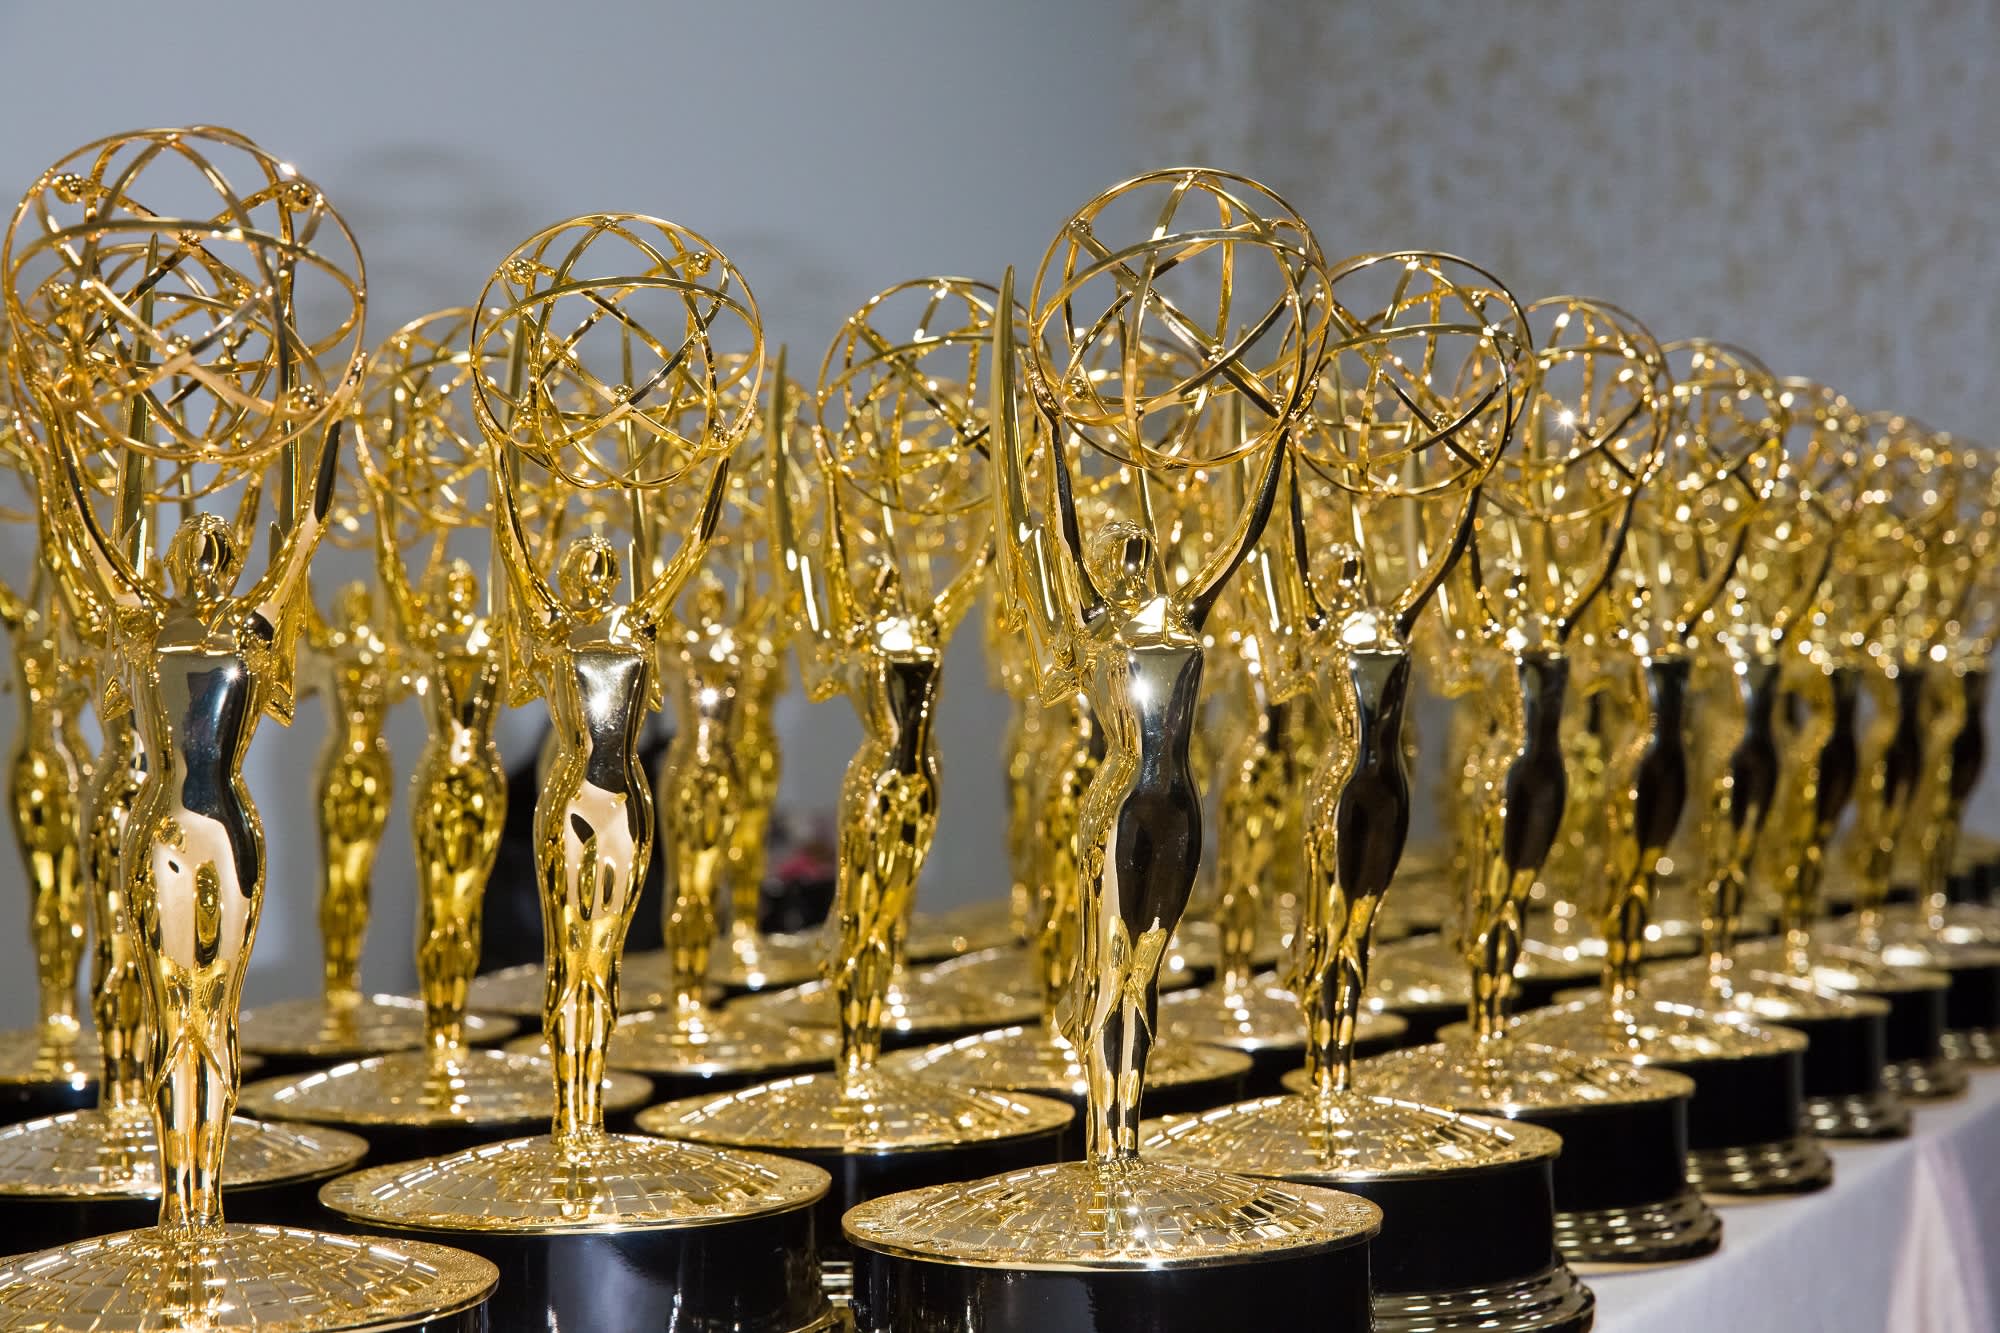 Emmy Nominations 2019: The complete list of nominees